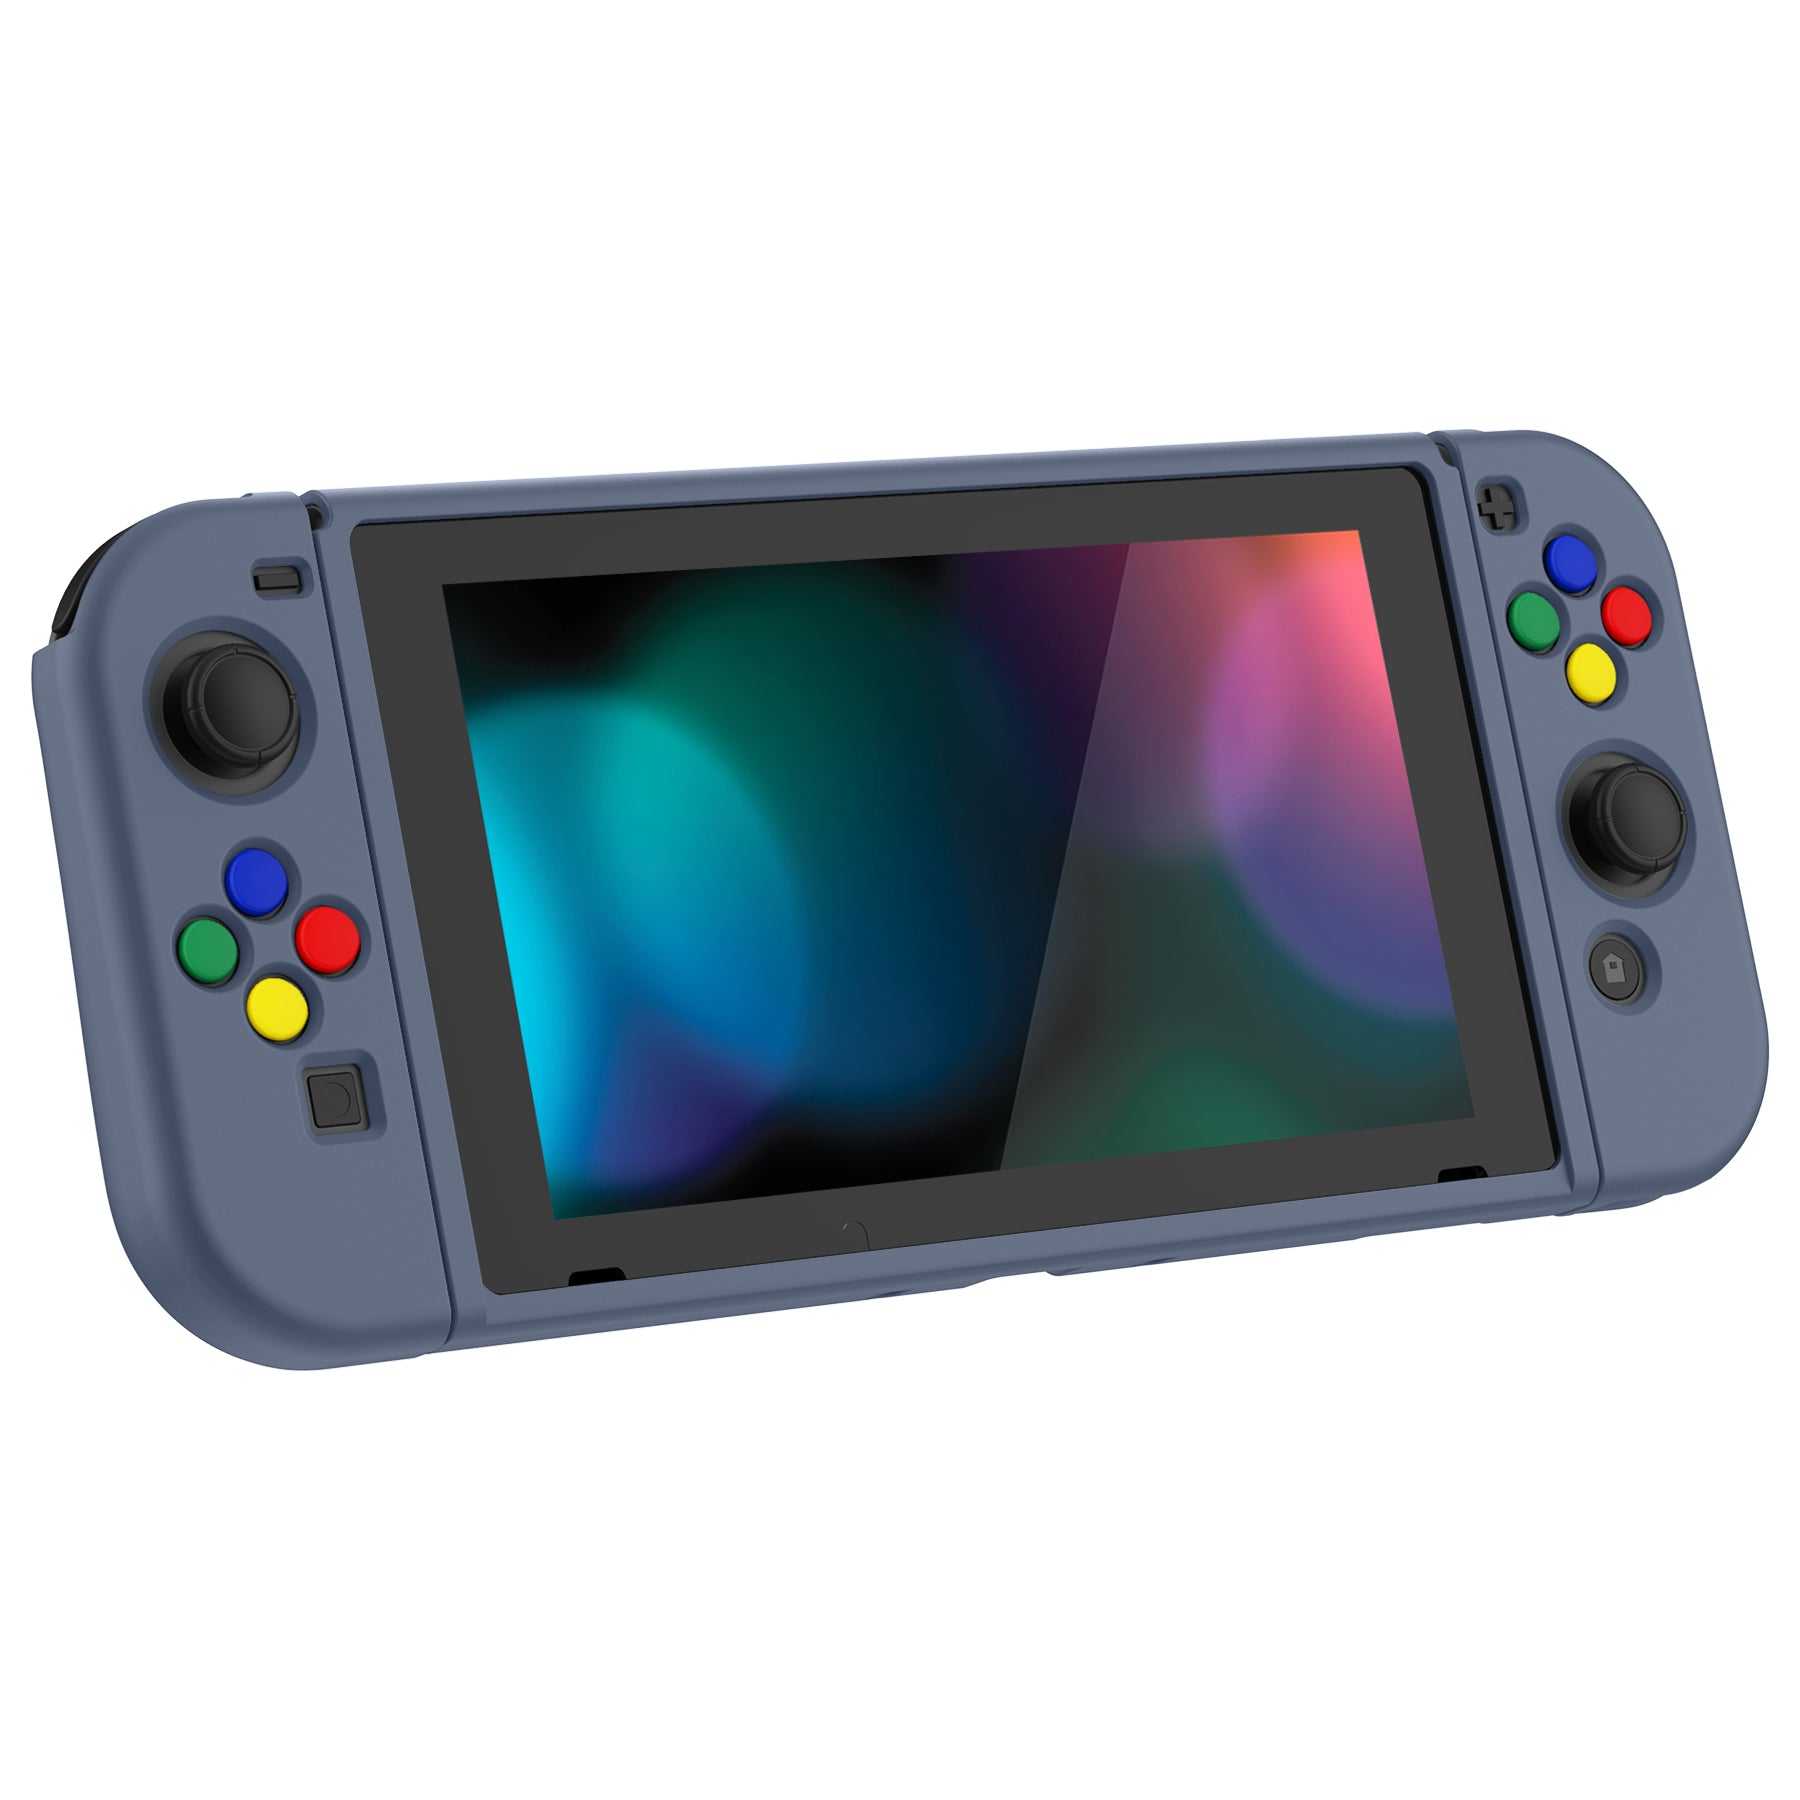 PlayVital Slate Gray Protective Case for NS Switch, Soft TPU Slim Case Cover for NS Switch Console with Colorful ABXY Direction Button Caps - NTU6039G2 PlayVital